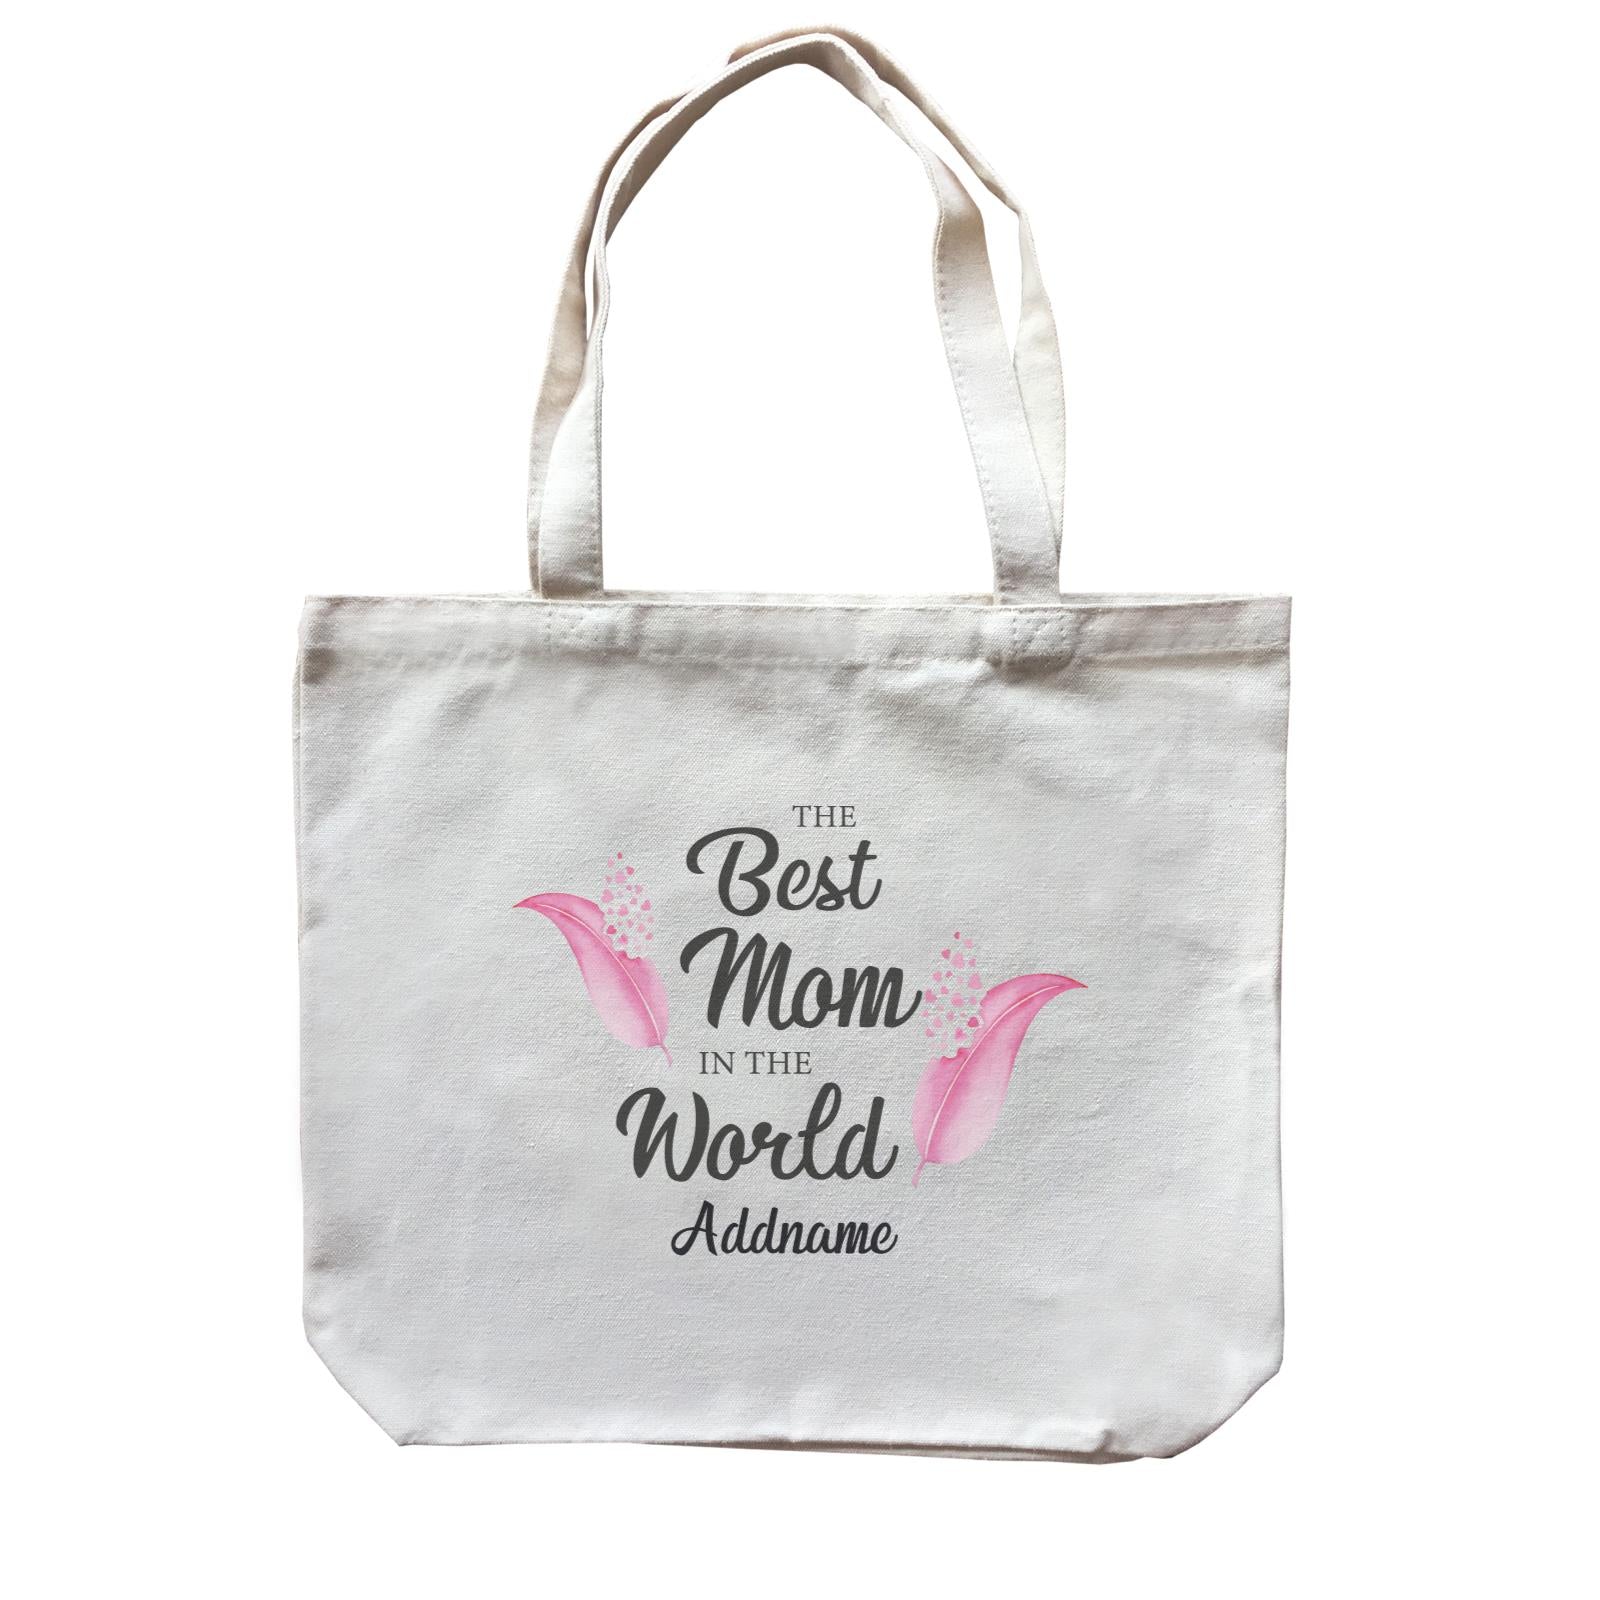 Sweet Mom Quotes 1 Love Feathers The Best Mom In The World Addname Accessories Canvas Bag